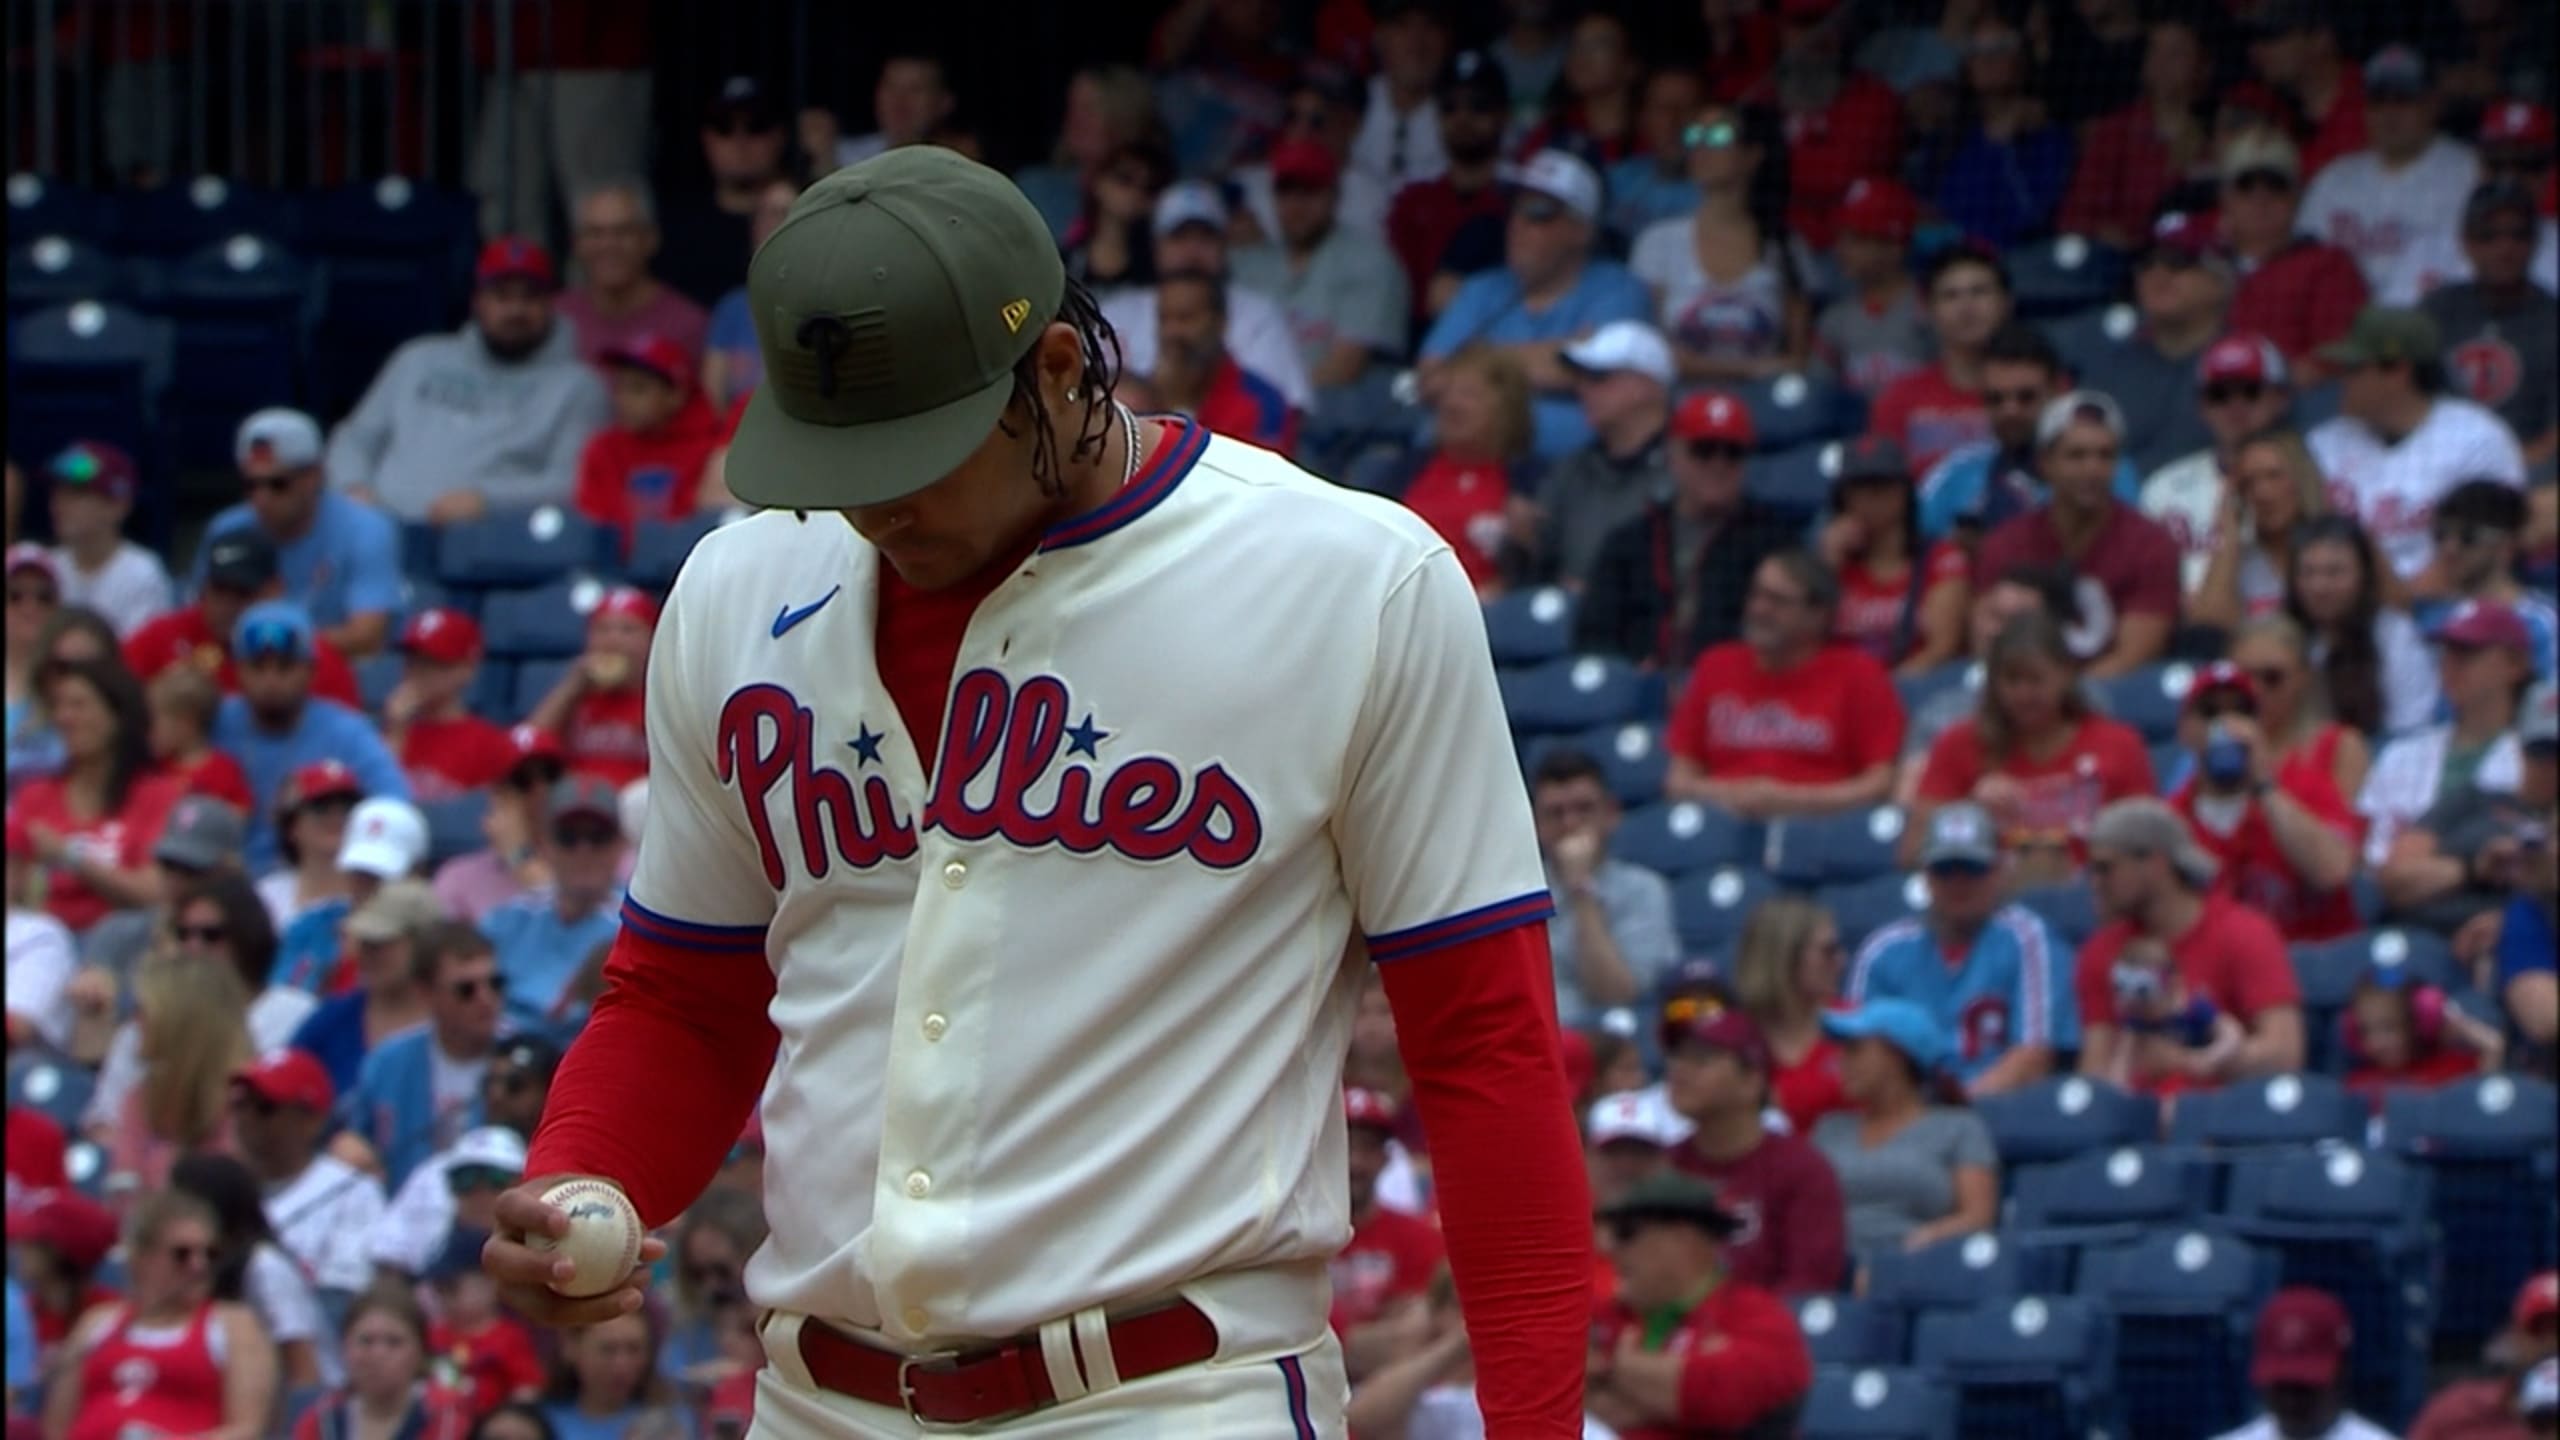 Maybe New York can learn from Phillies fans' treatment of Trea